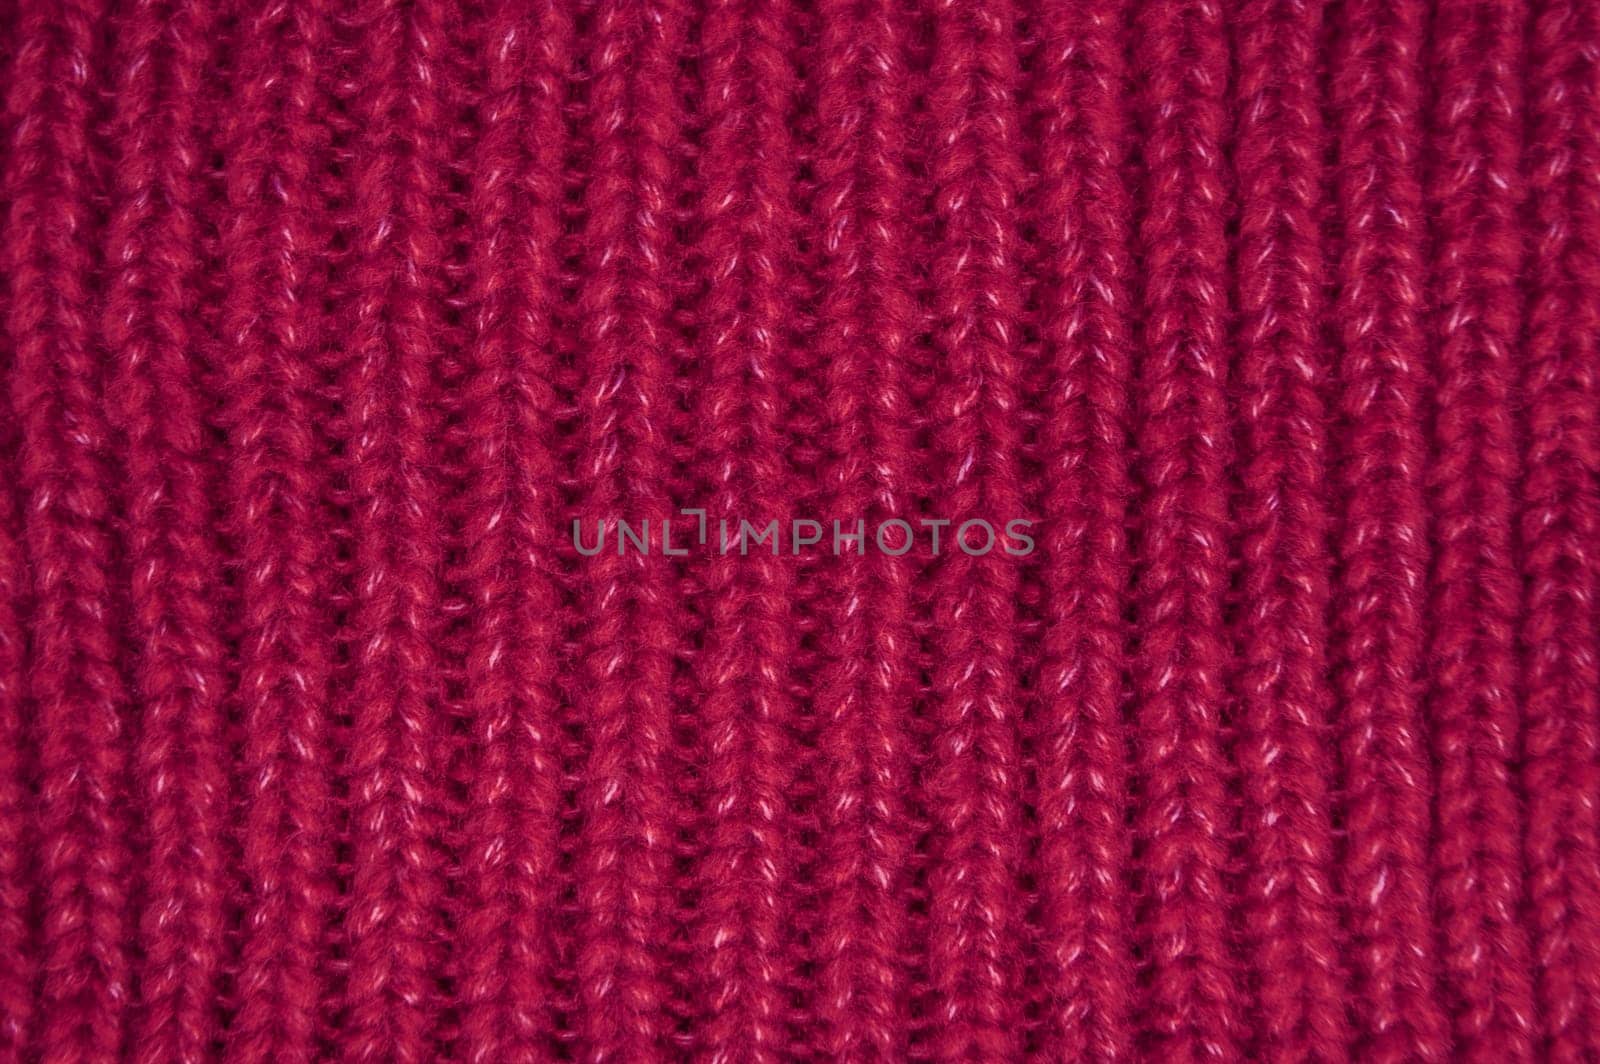 Structure Knitted Wool. Organic Woven Pullover. Cotton Handmade Christmas Background. Closeup Abstract Wool. Red Macro Thread. Nordic Xmas Canvas. Weave Cloth Embroidery. Knitted Fabric.